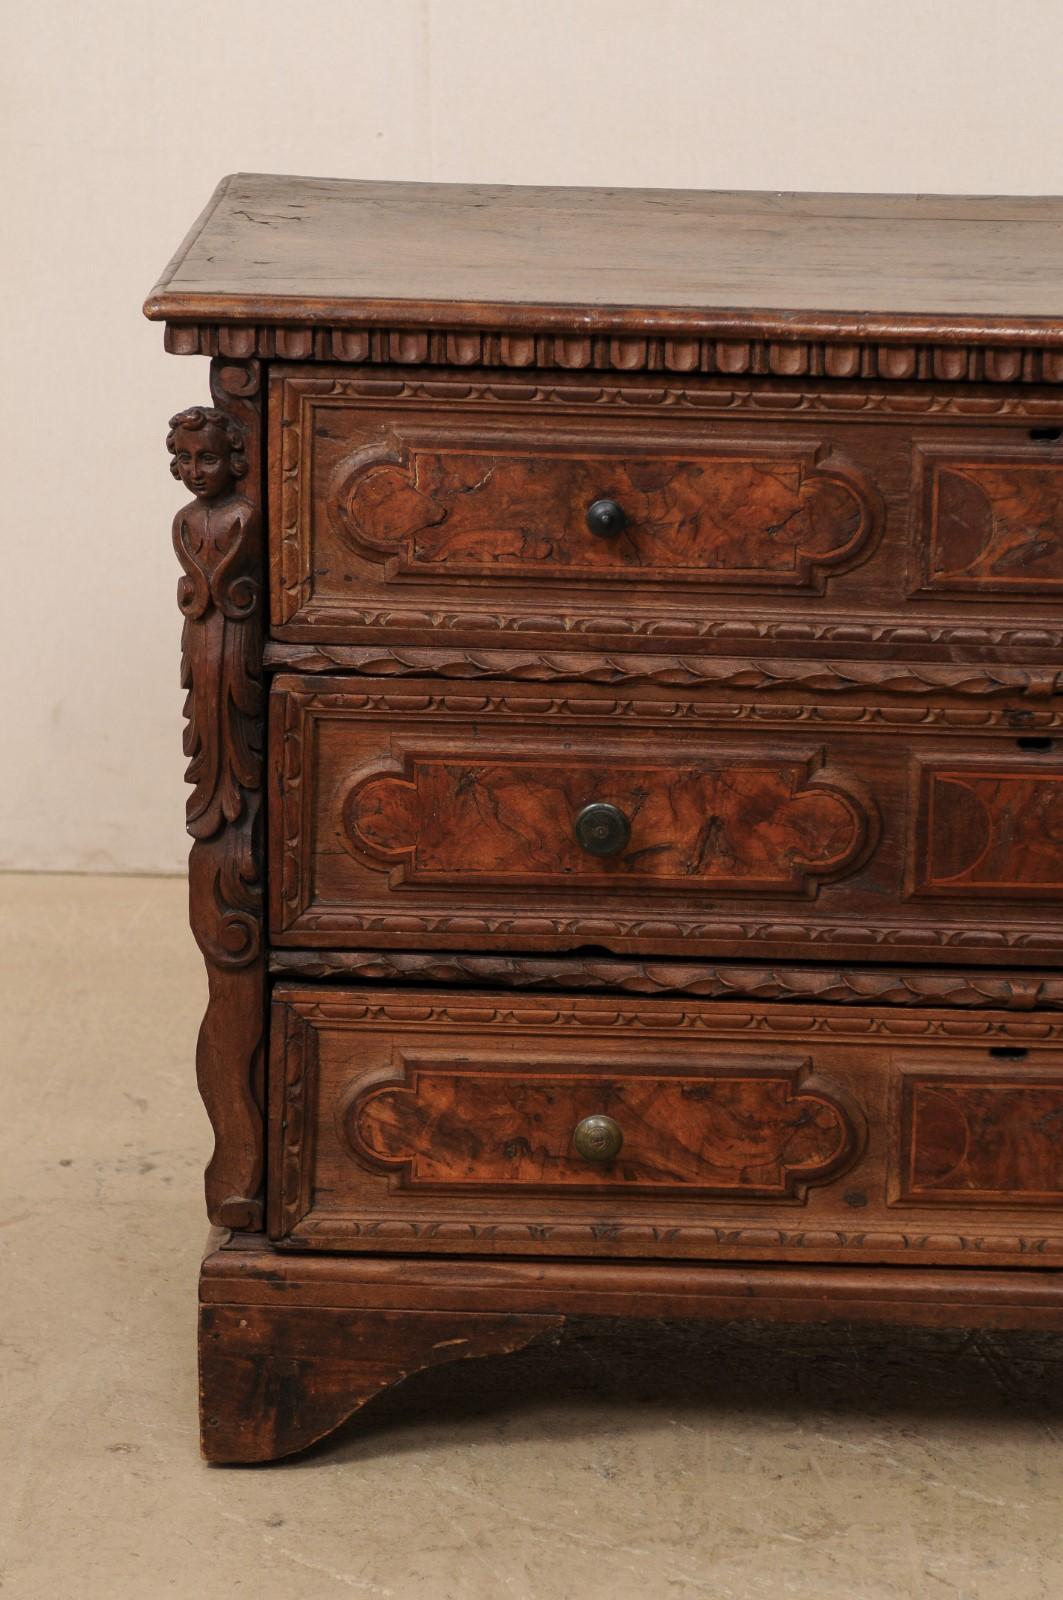 18th C Italian Chest Adorn with Putti, Egg-n-Dart, and Acanthus Carvings For Sale 5